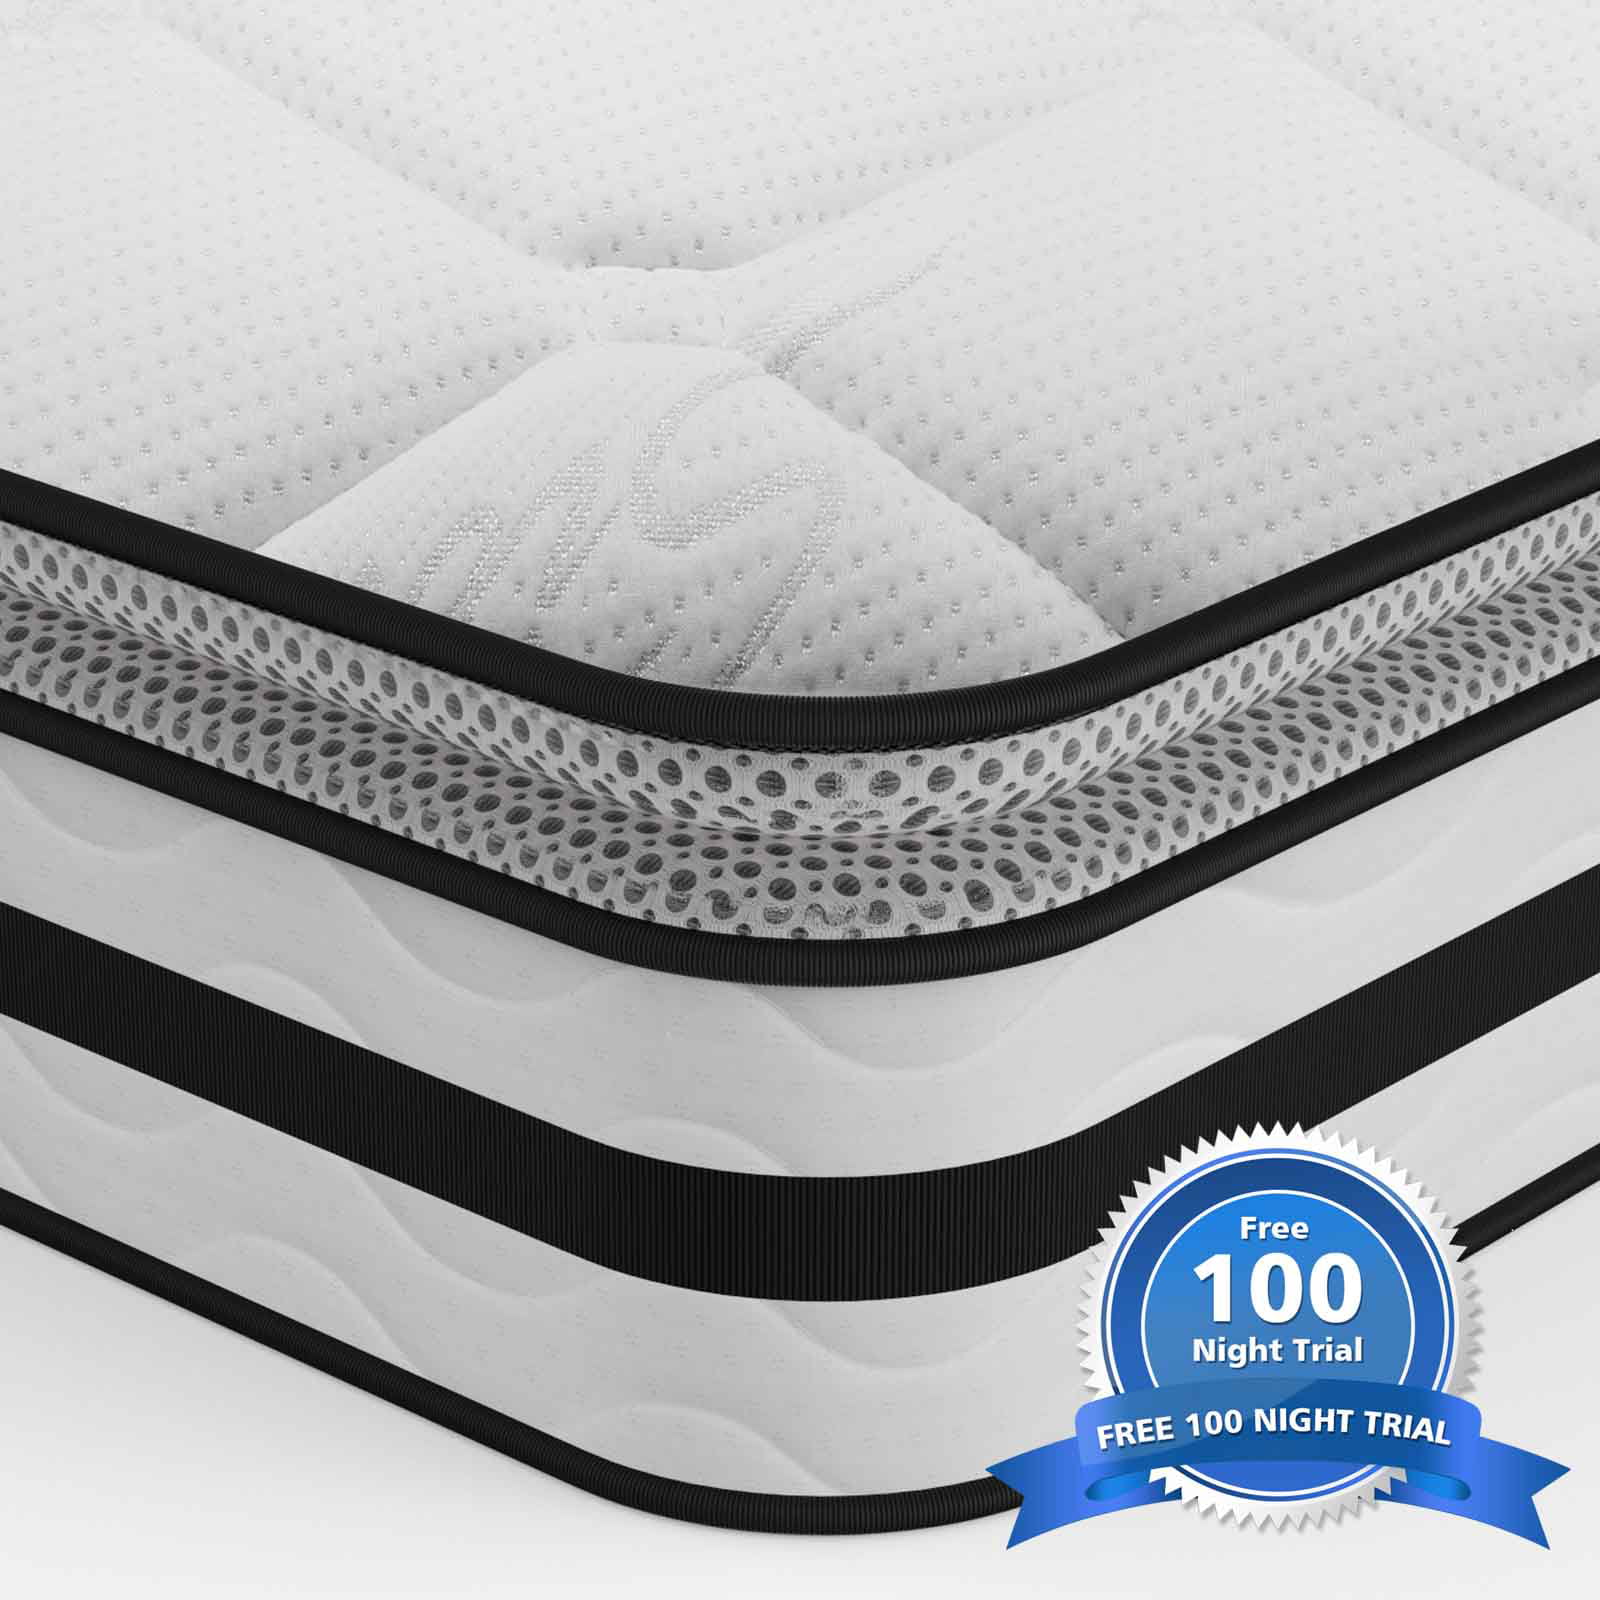 Individual Pocket Spring Sleeps Cooler Motion Isolation Full Size Medium Firm Feel Breathable Comfortable Morpilot 10 inch Memory Foam and Innerspring Hybrid Mattress in a Box Pressure Relief